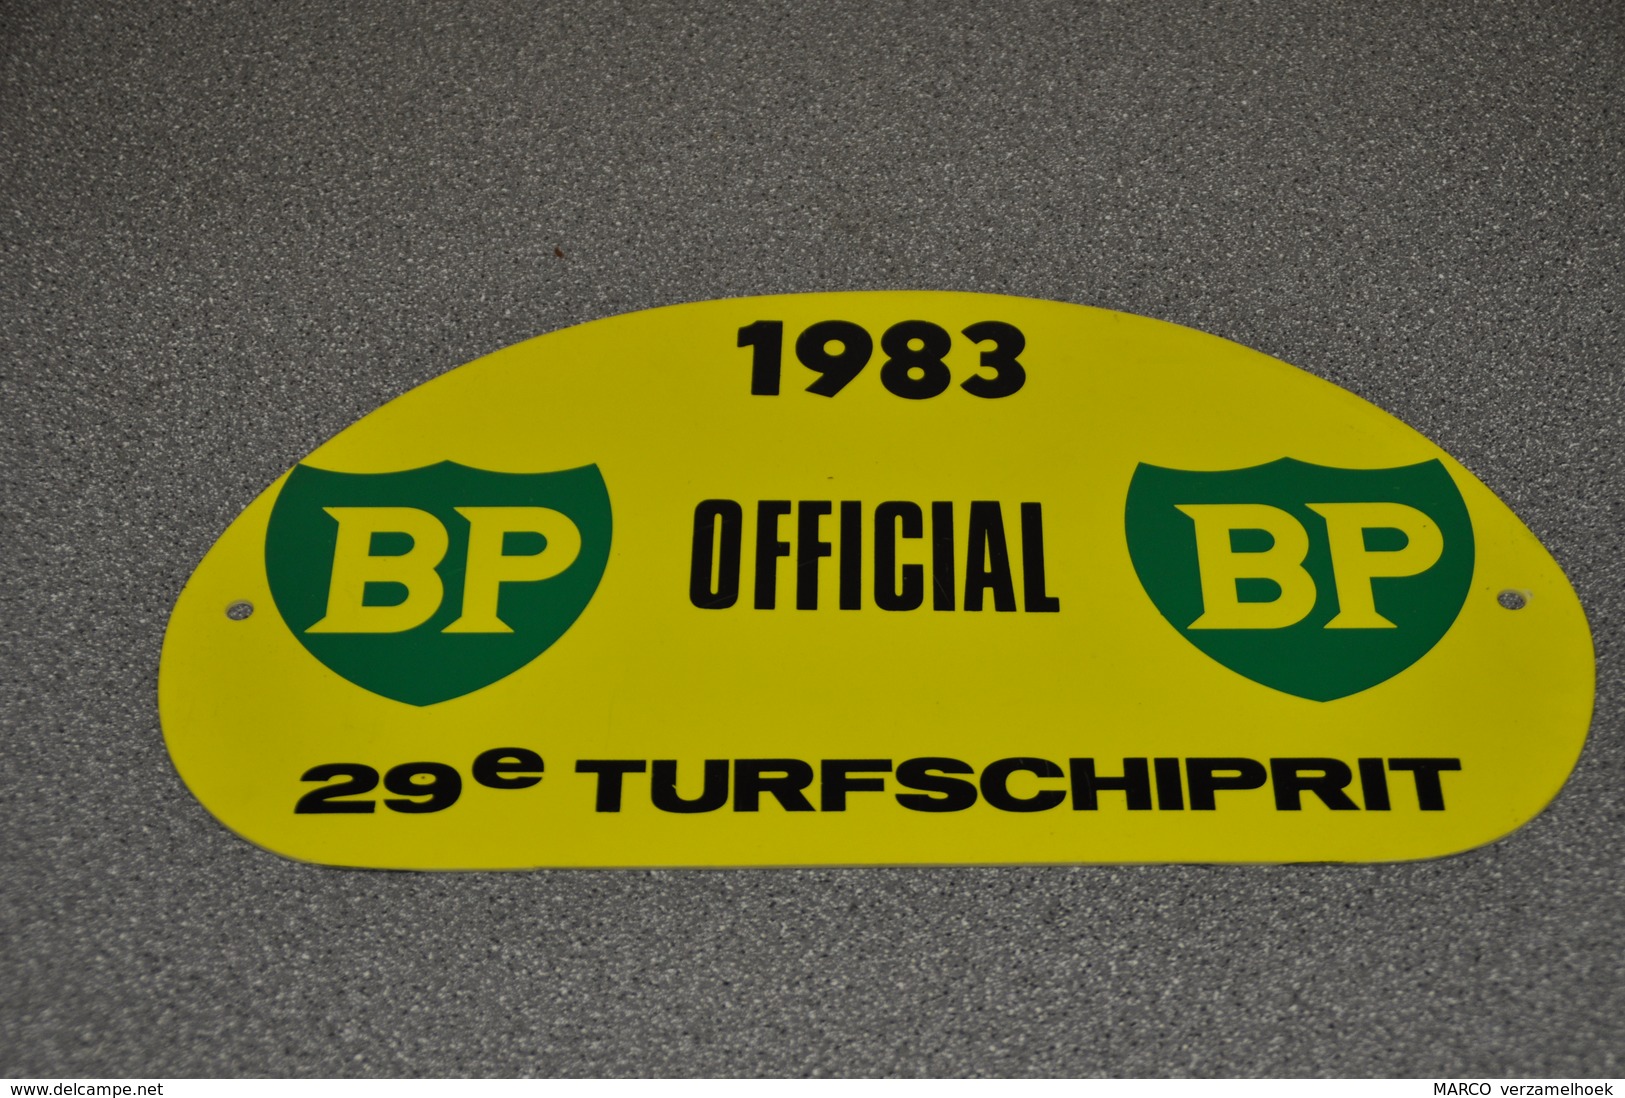 Rally Plaat-rallye Plaque Plastic: 29e Turfschiprit Breda 1983 OFFICIAL BP - Rally-affiches